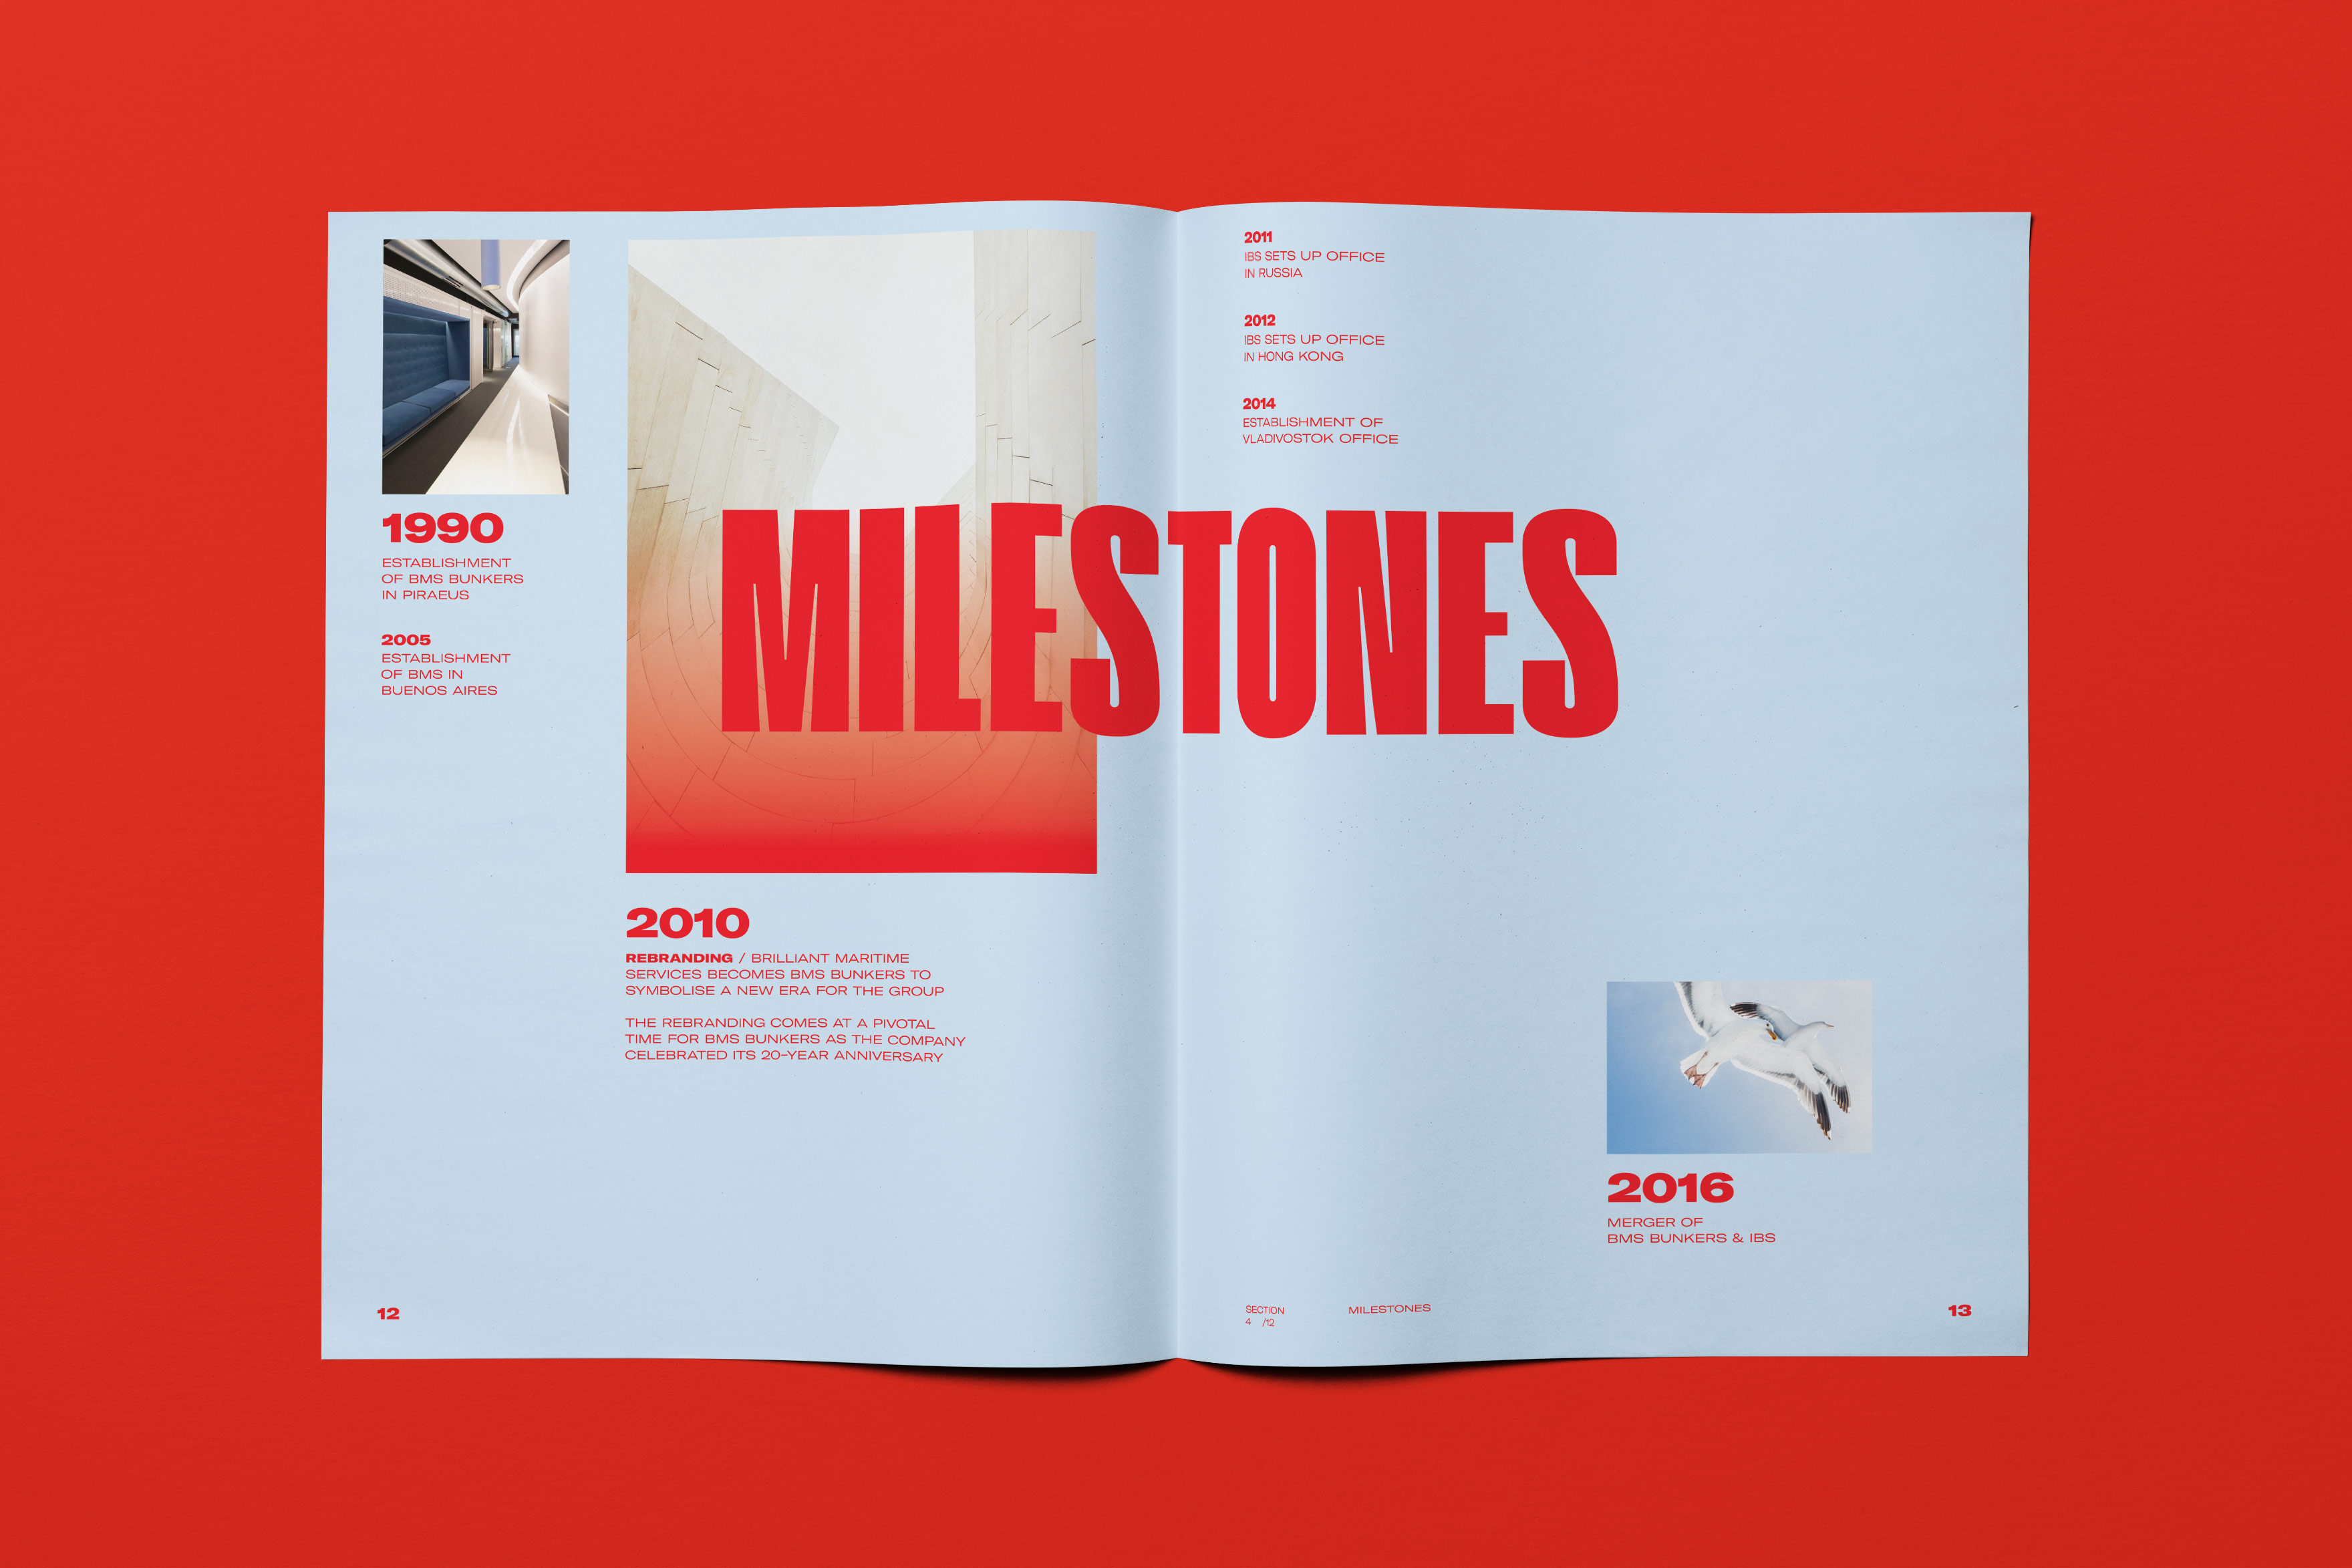 bms united annual report 2021 opened spreads milestone kommigraphics